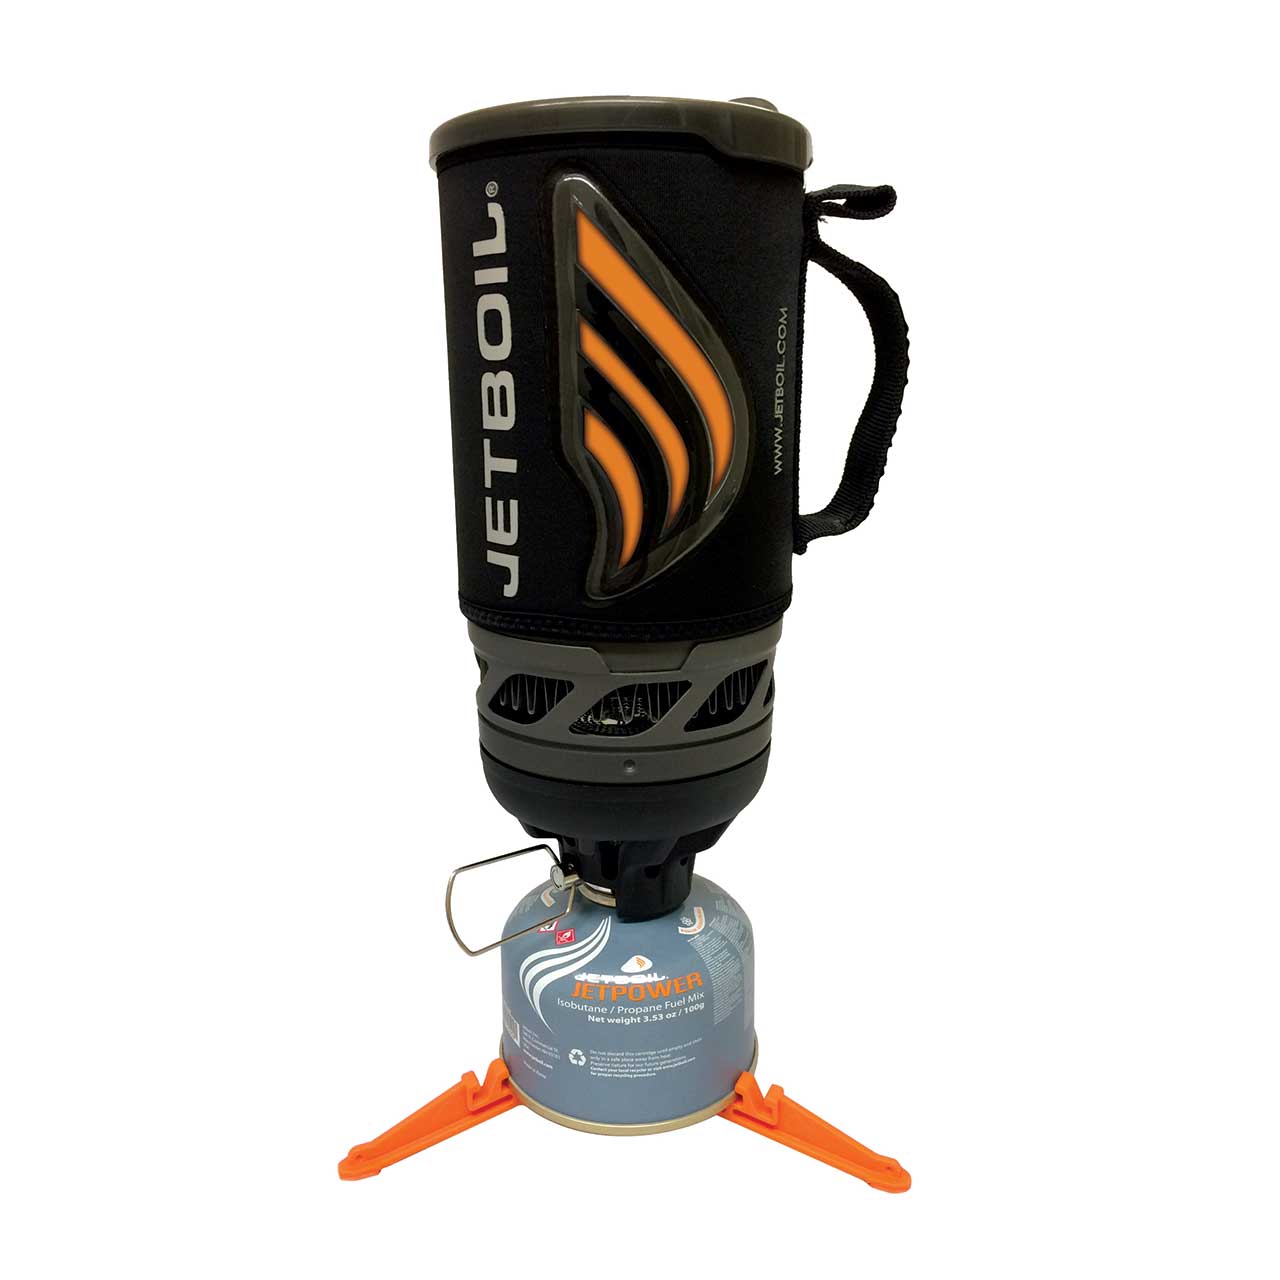 Jetboil Flash Cooking System - Used